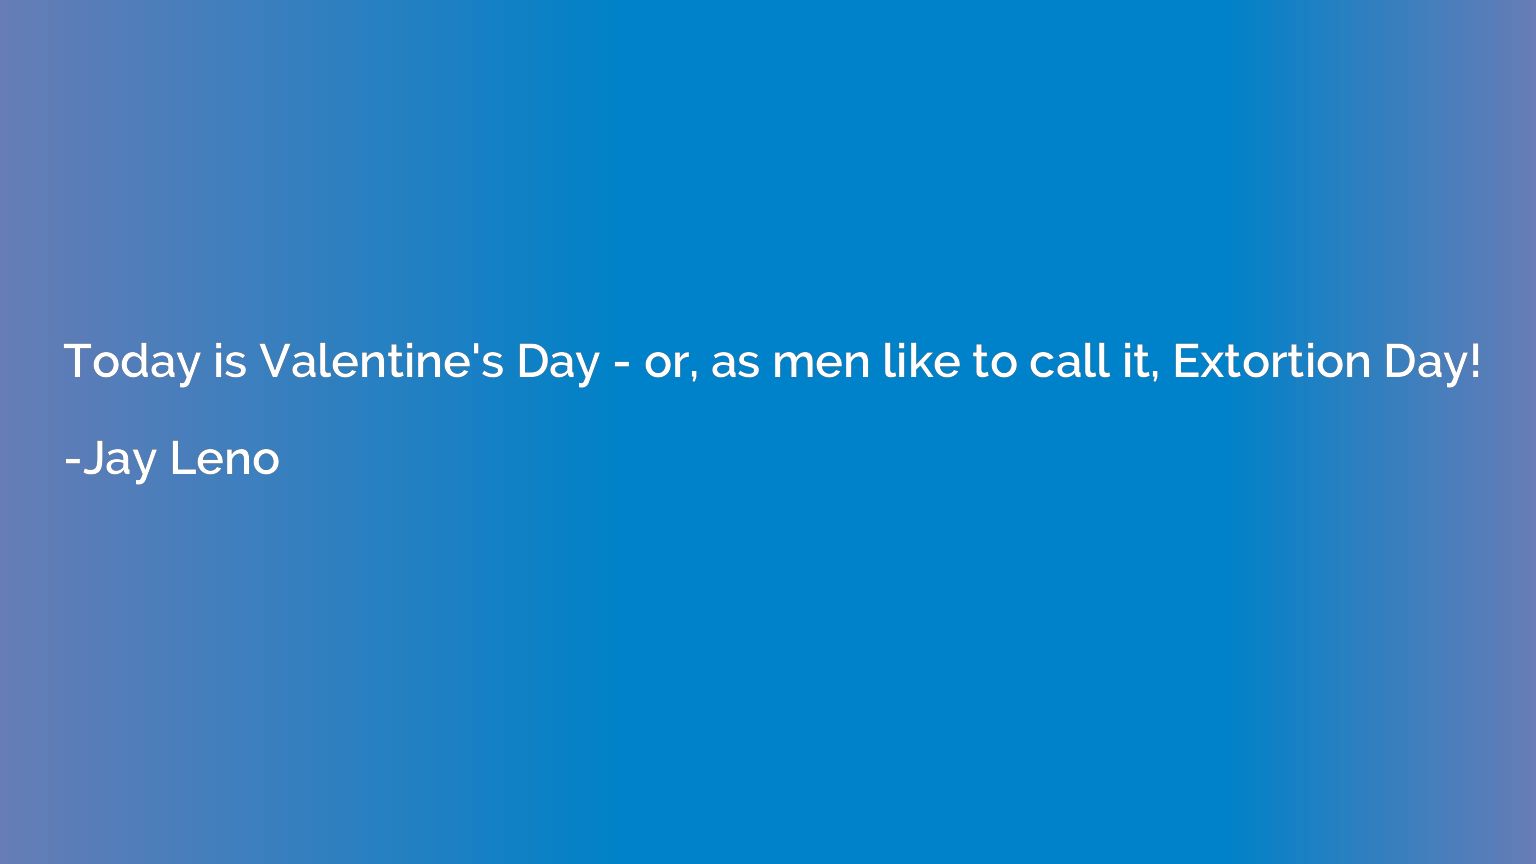 Today is Valentine's Day - or, as men like to call it, Extor